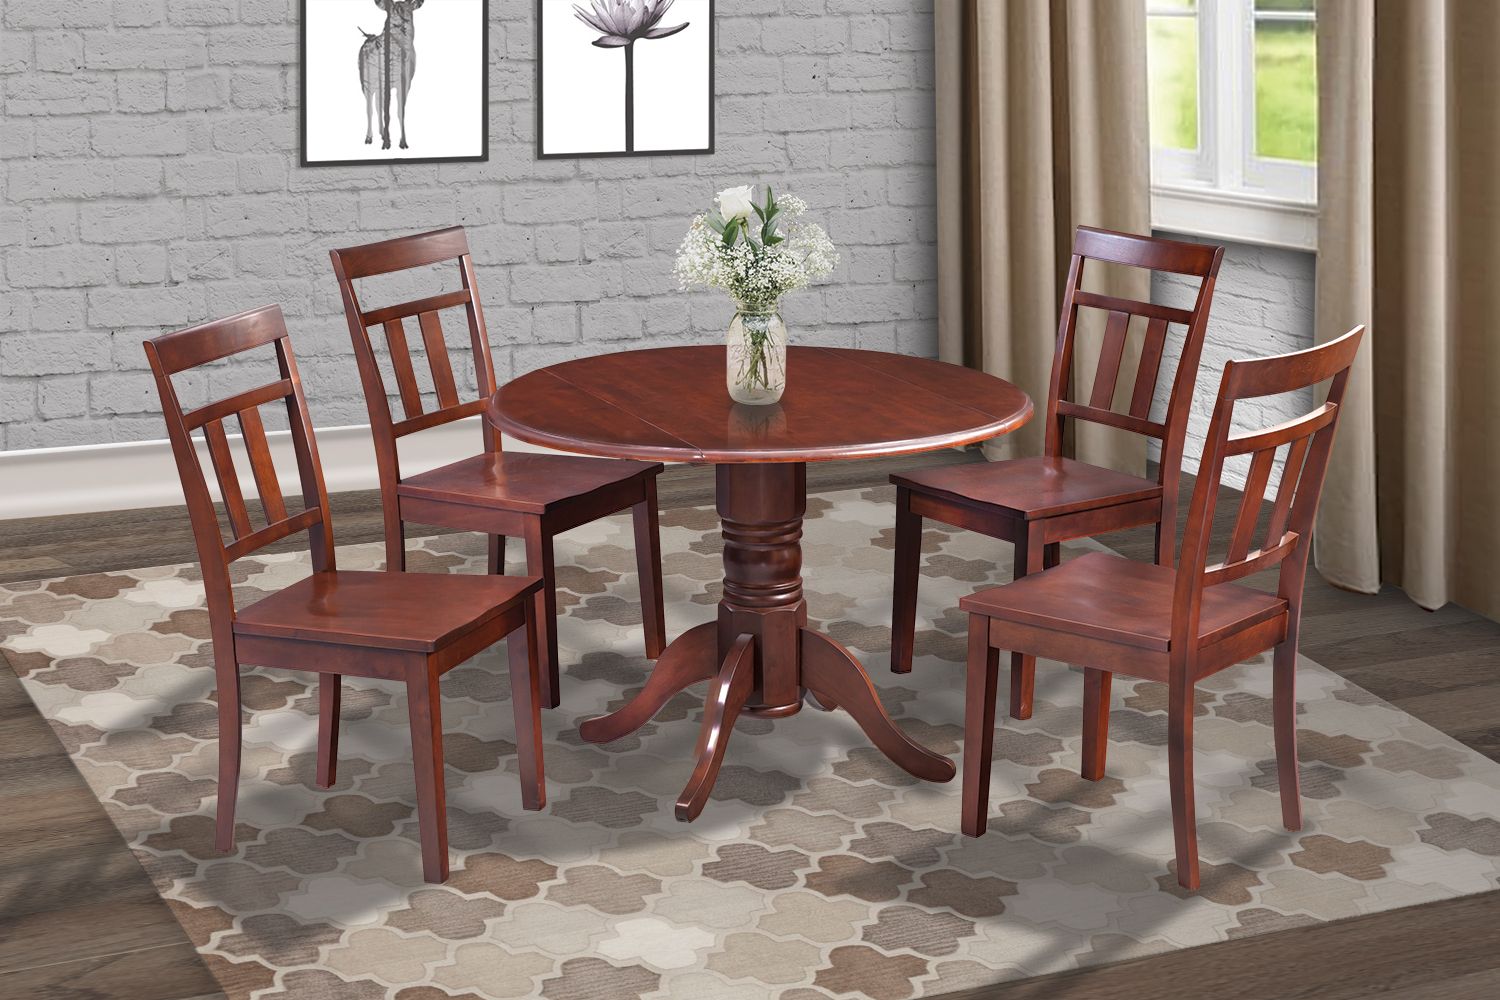 M&D Furniture Llc Pertaining To Current Villani Drop Leaf Rubberwood Solid Wood Pedestal Dining Tables (View 4 of 15)